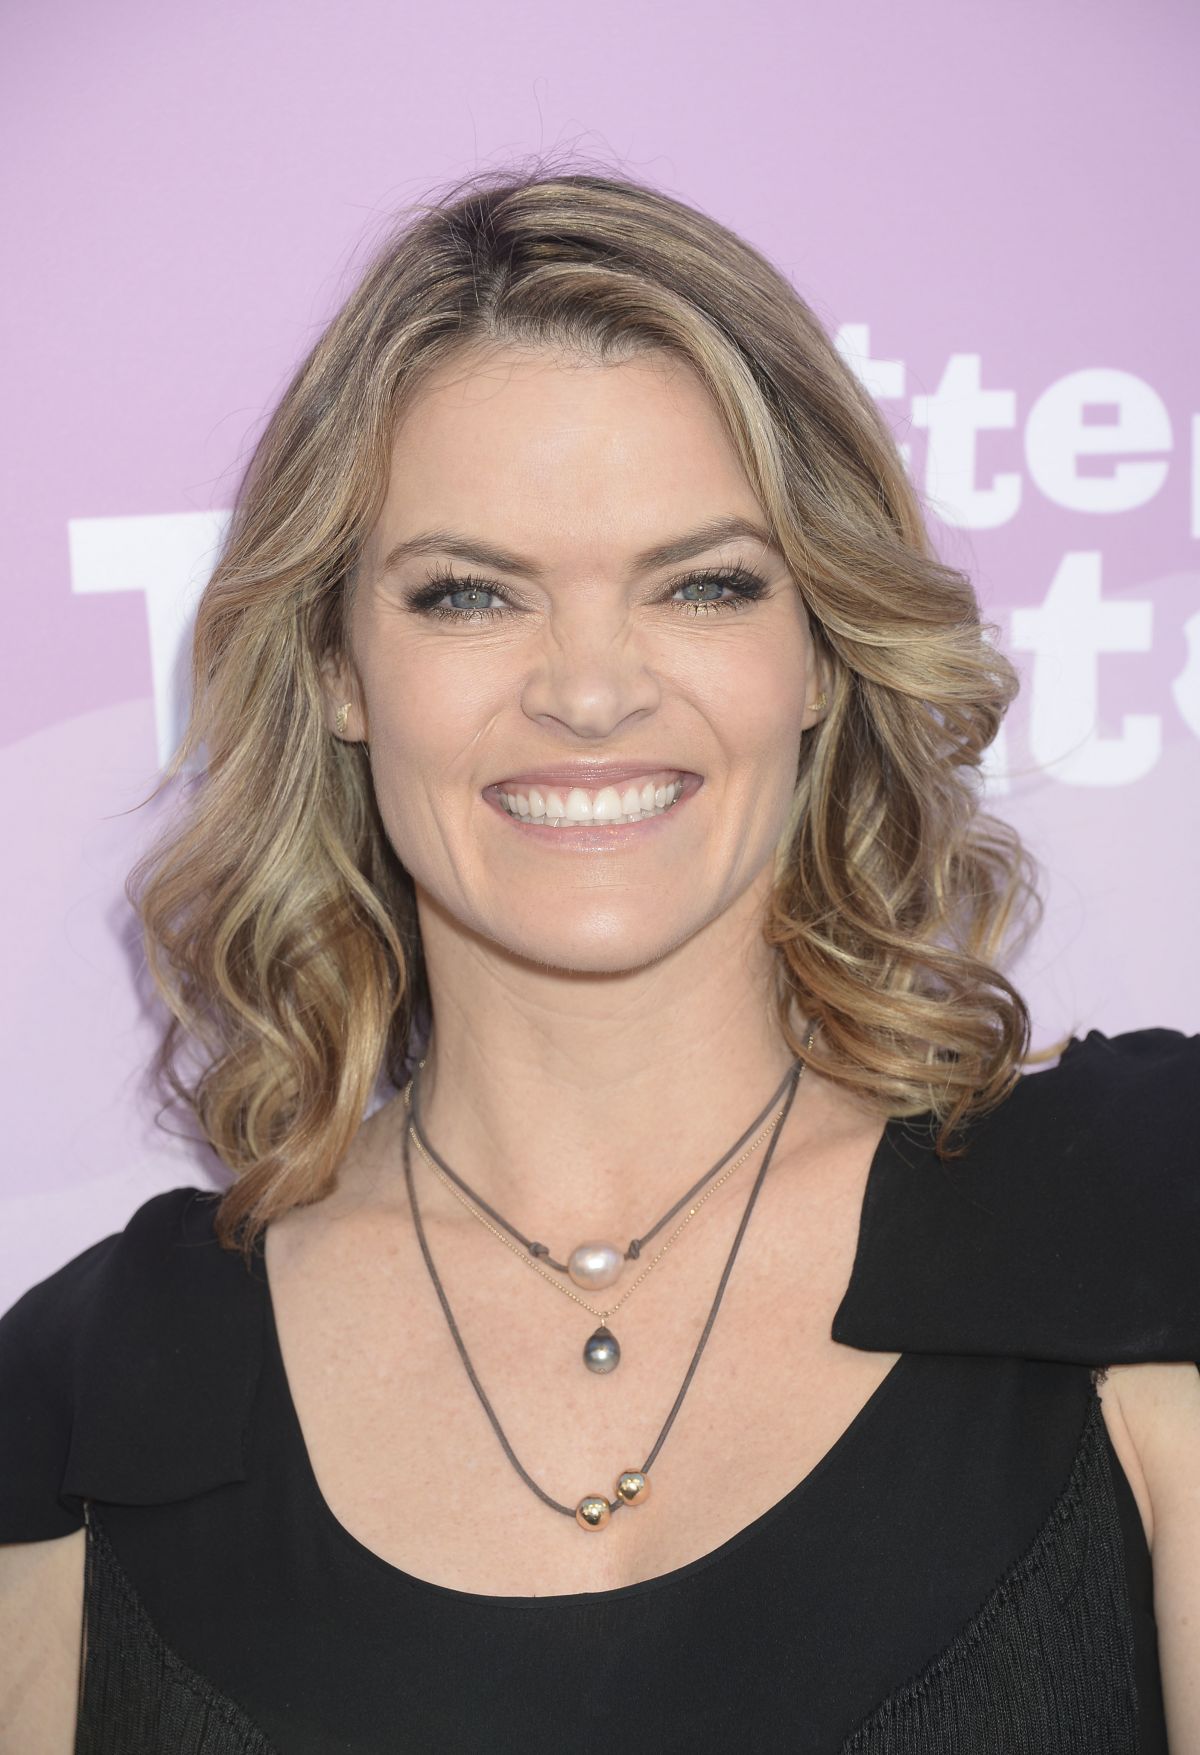 MISSI PYLE at Variety’s Awards Nominees Brunch in Los Angeles 01/28/2017.